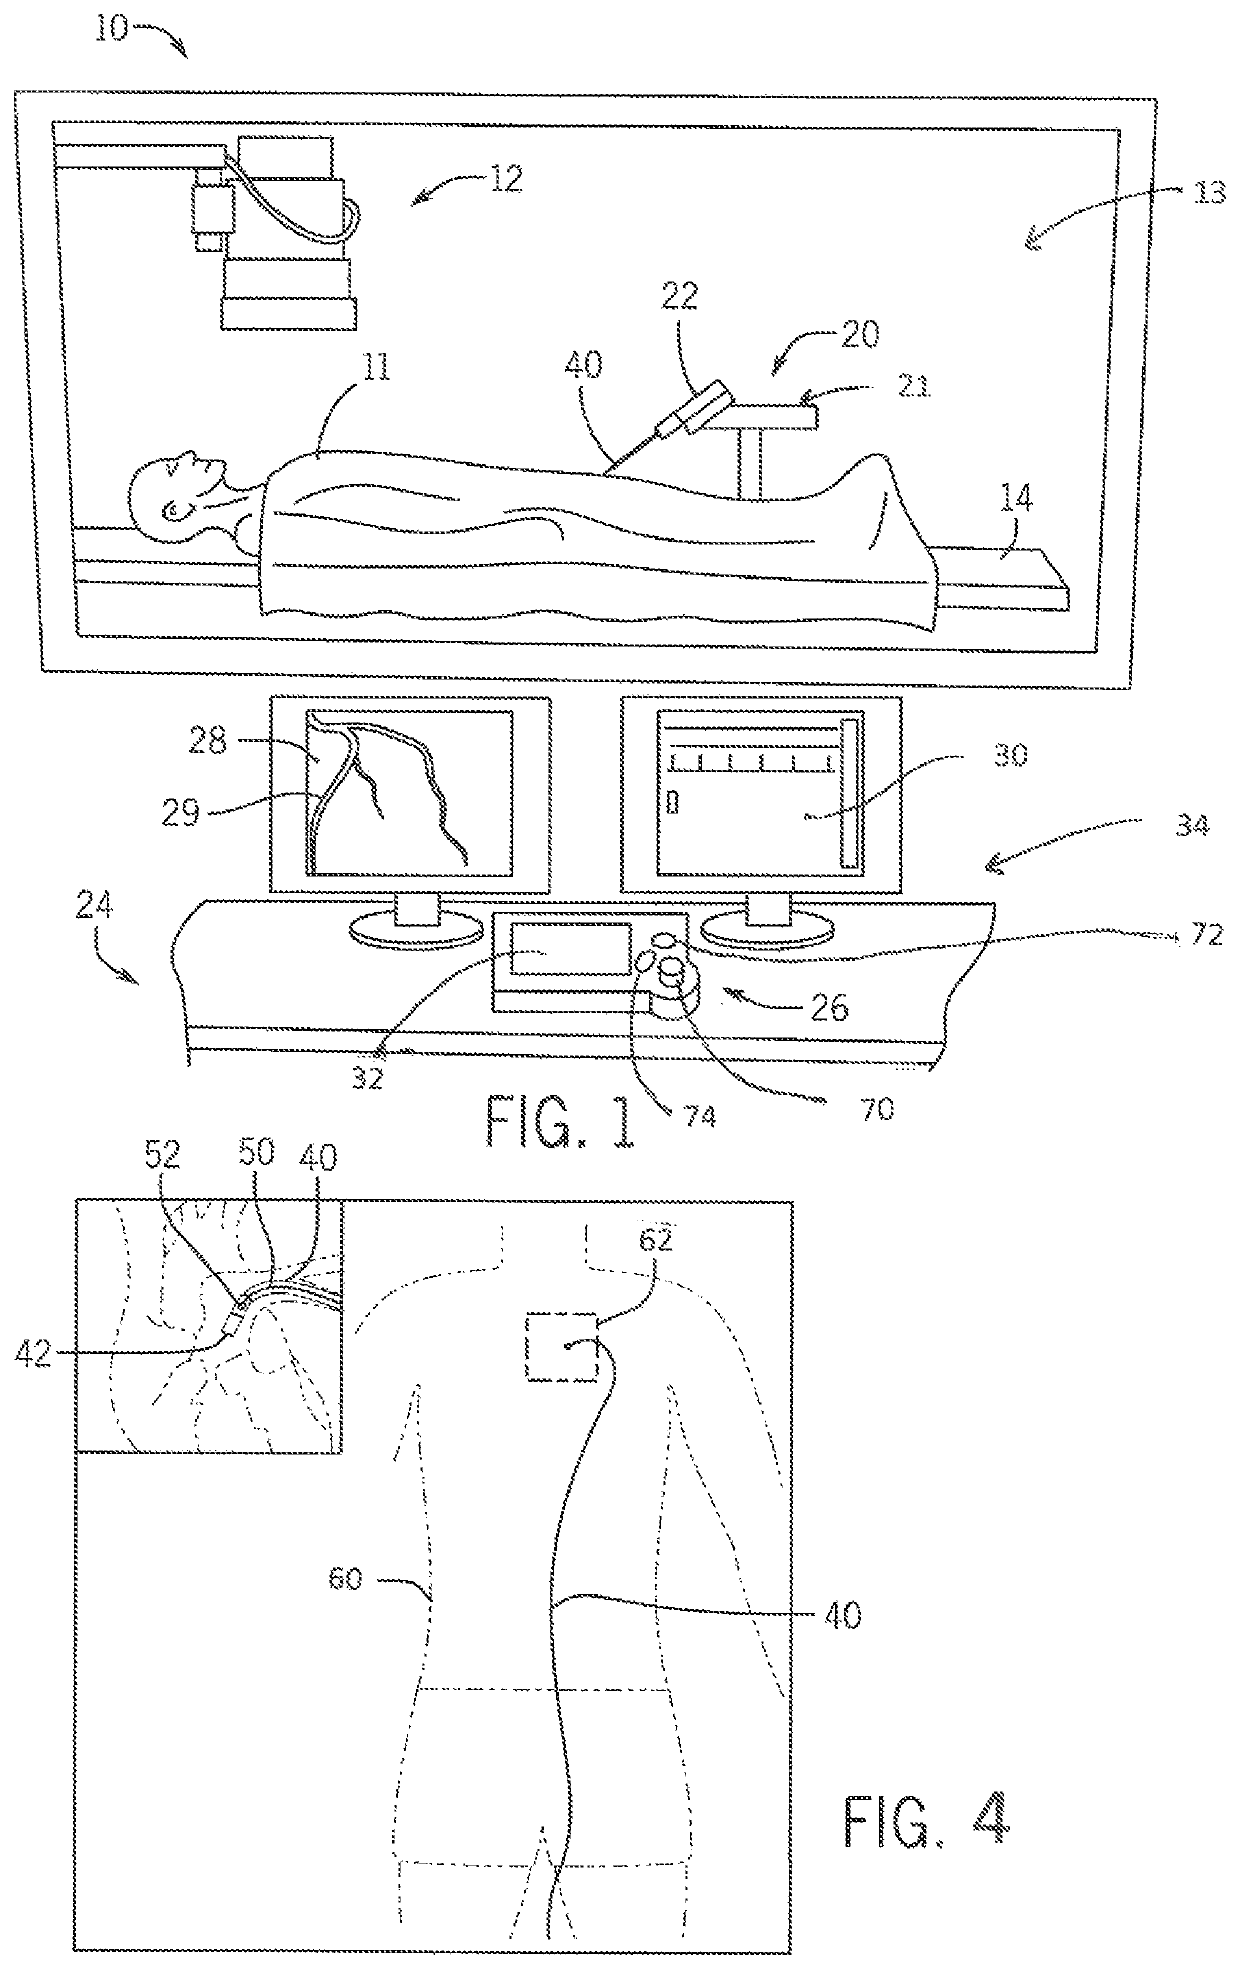 System and method for monitoring of guide catheter seating